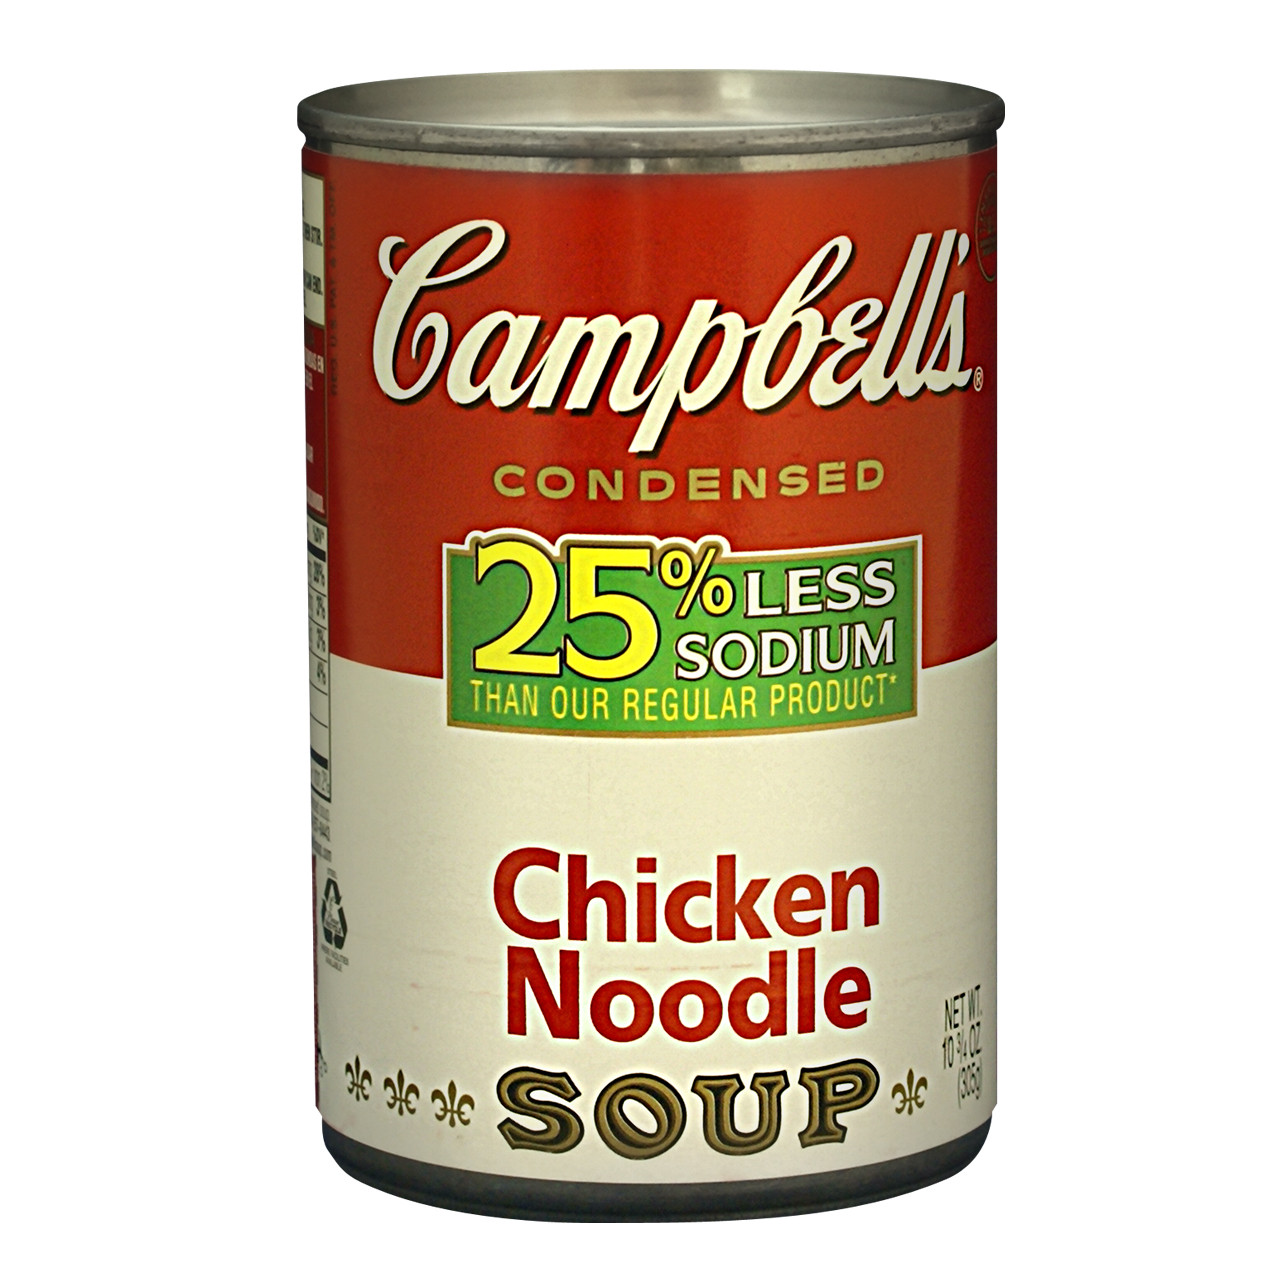 Campbells Chicken Noodle Soup
 CANNED GOODS SOUP PREPARED MEALS Campbell s